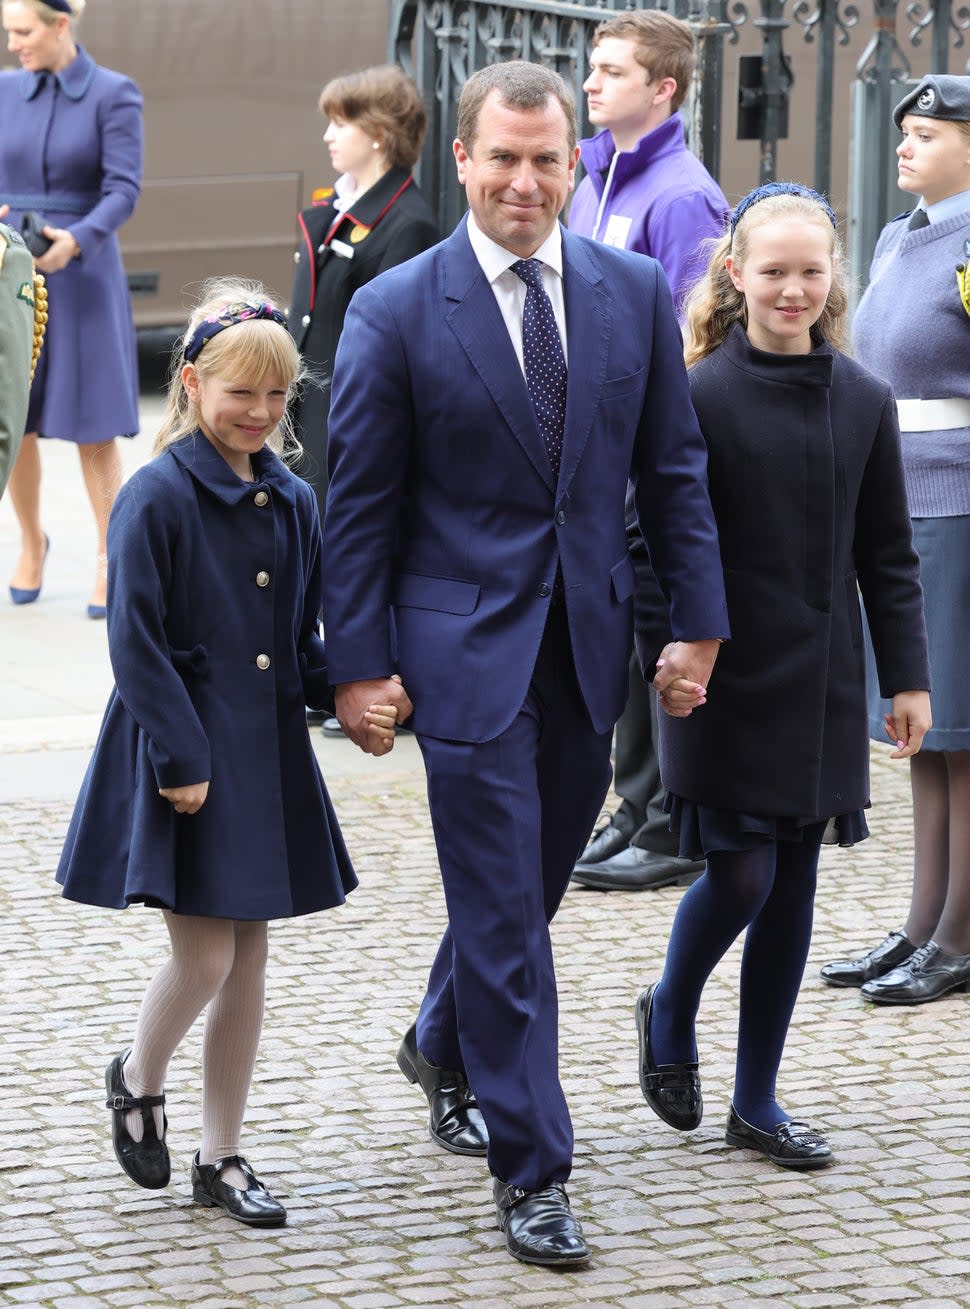 Mike Tindall attends Easter services with daughters Isla and Savannah on March 29, 2022.